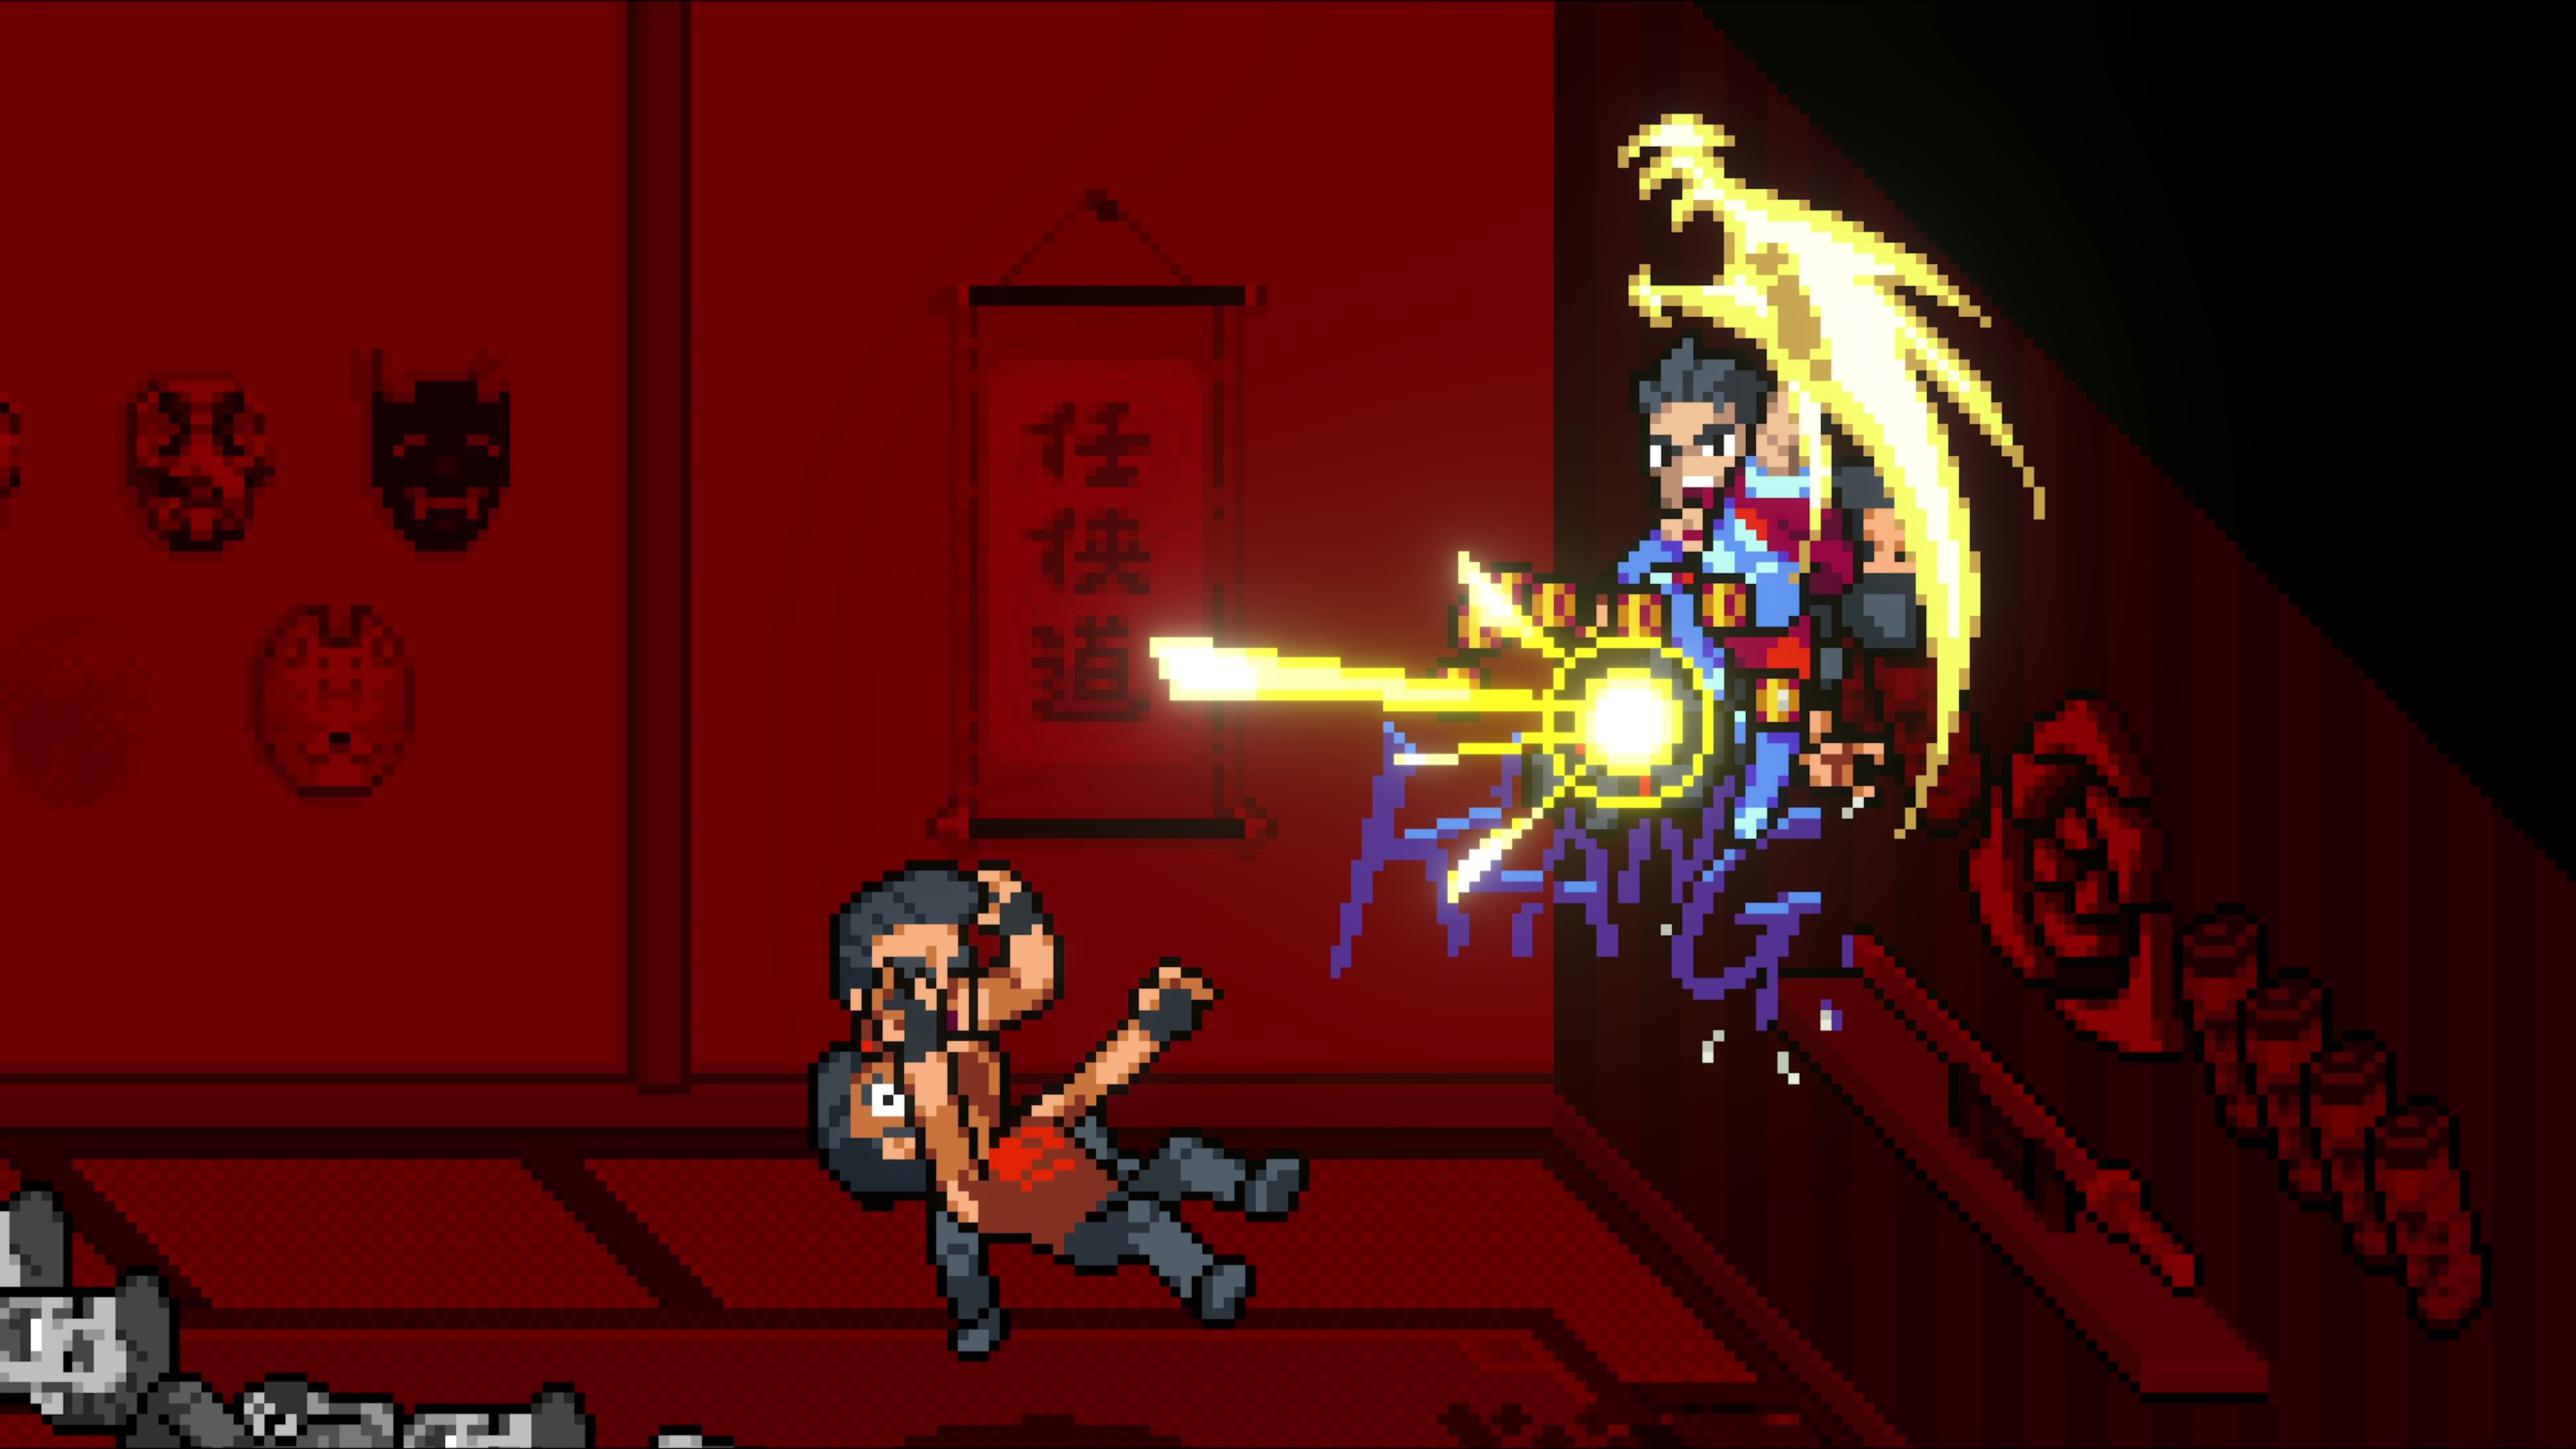 Double Dragon Gaiden: Rise of the Dragons gets July 2023 release date